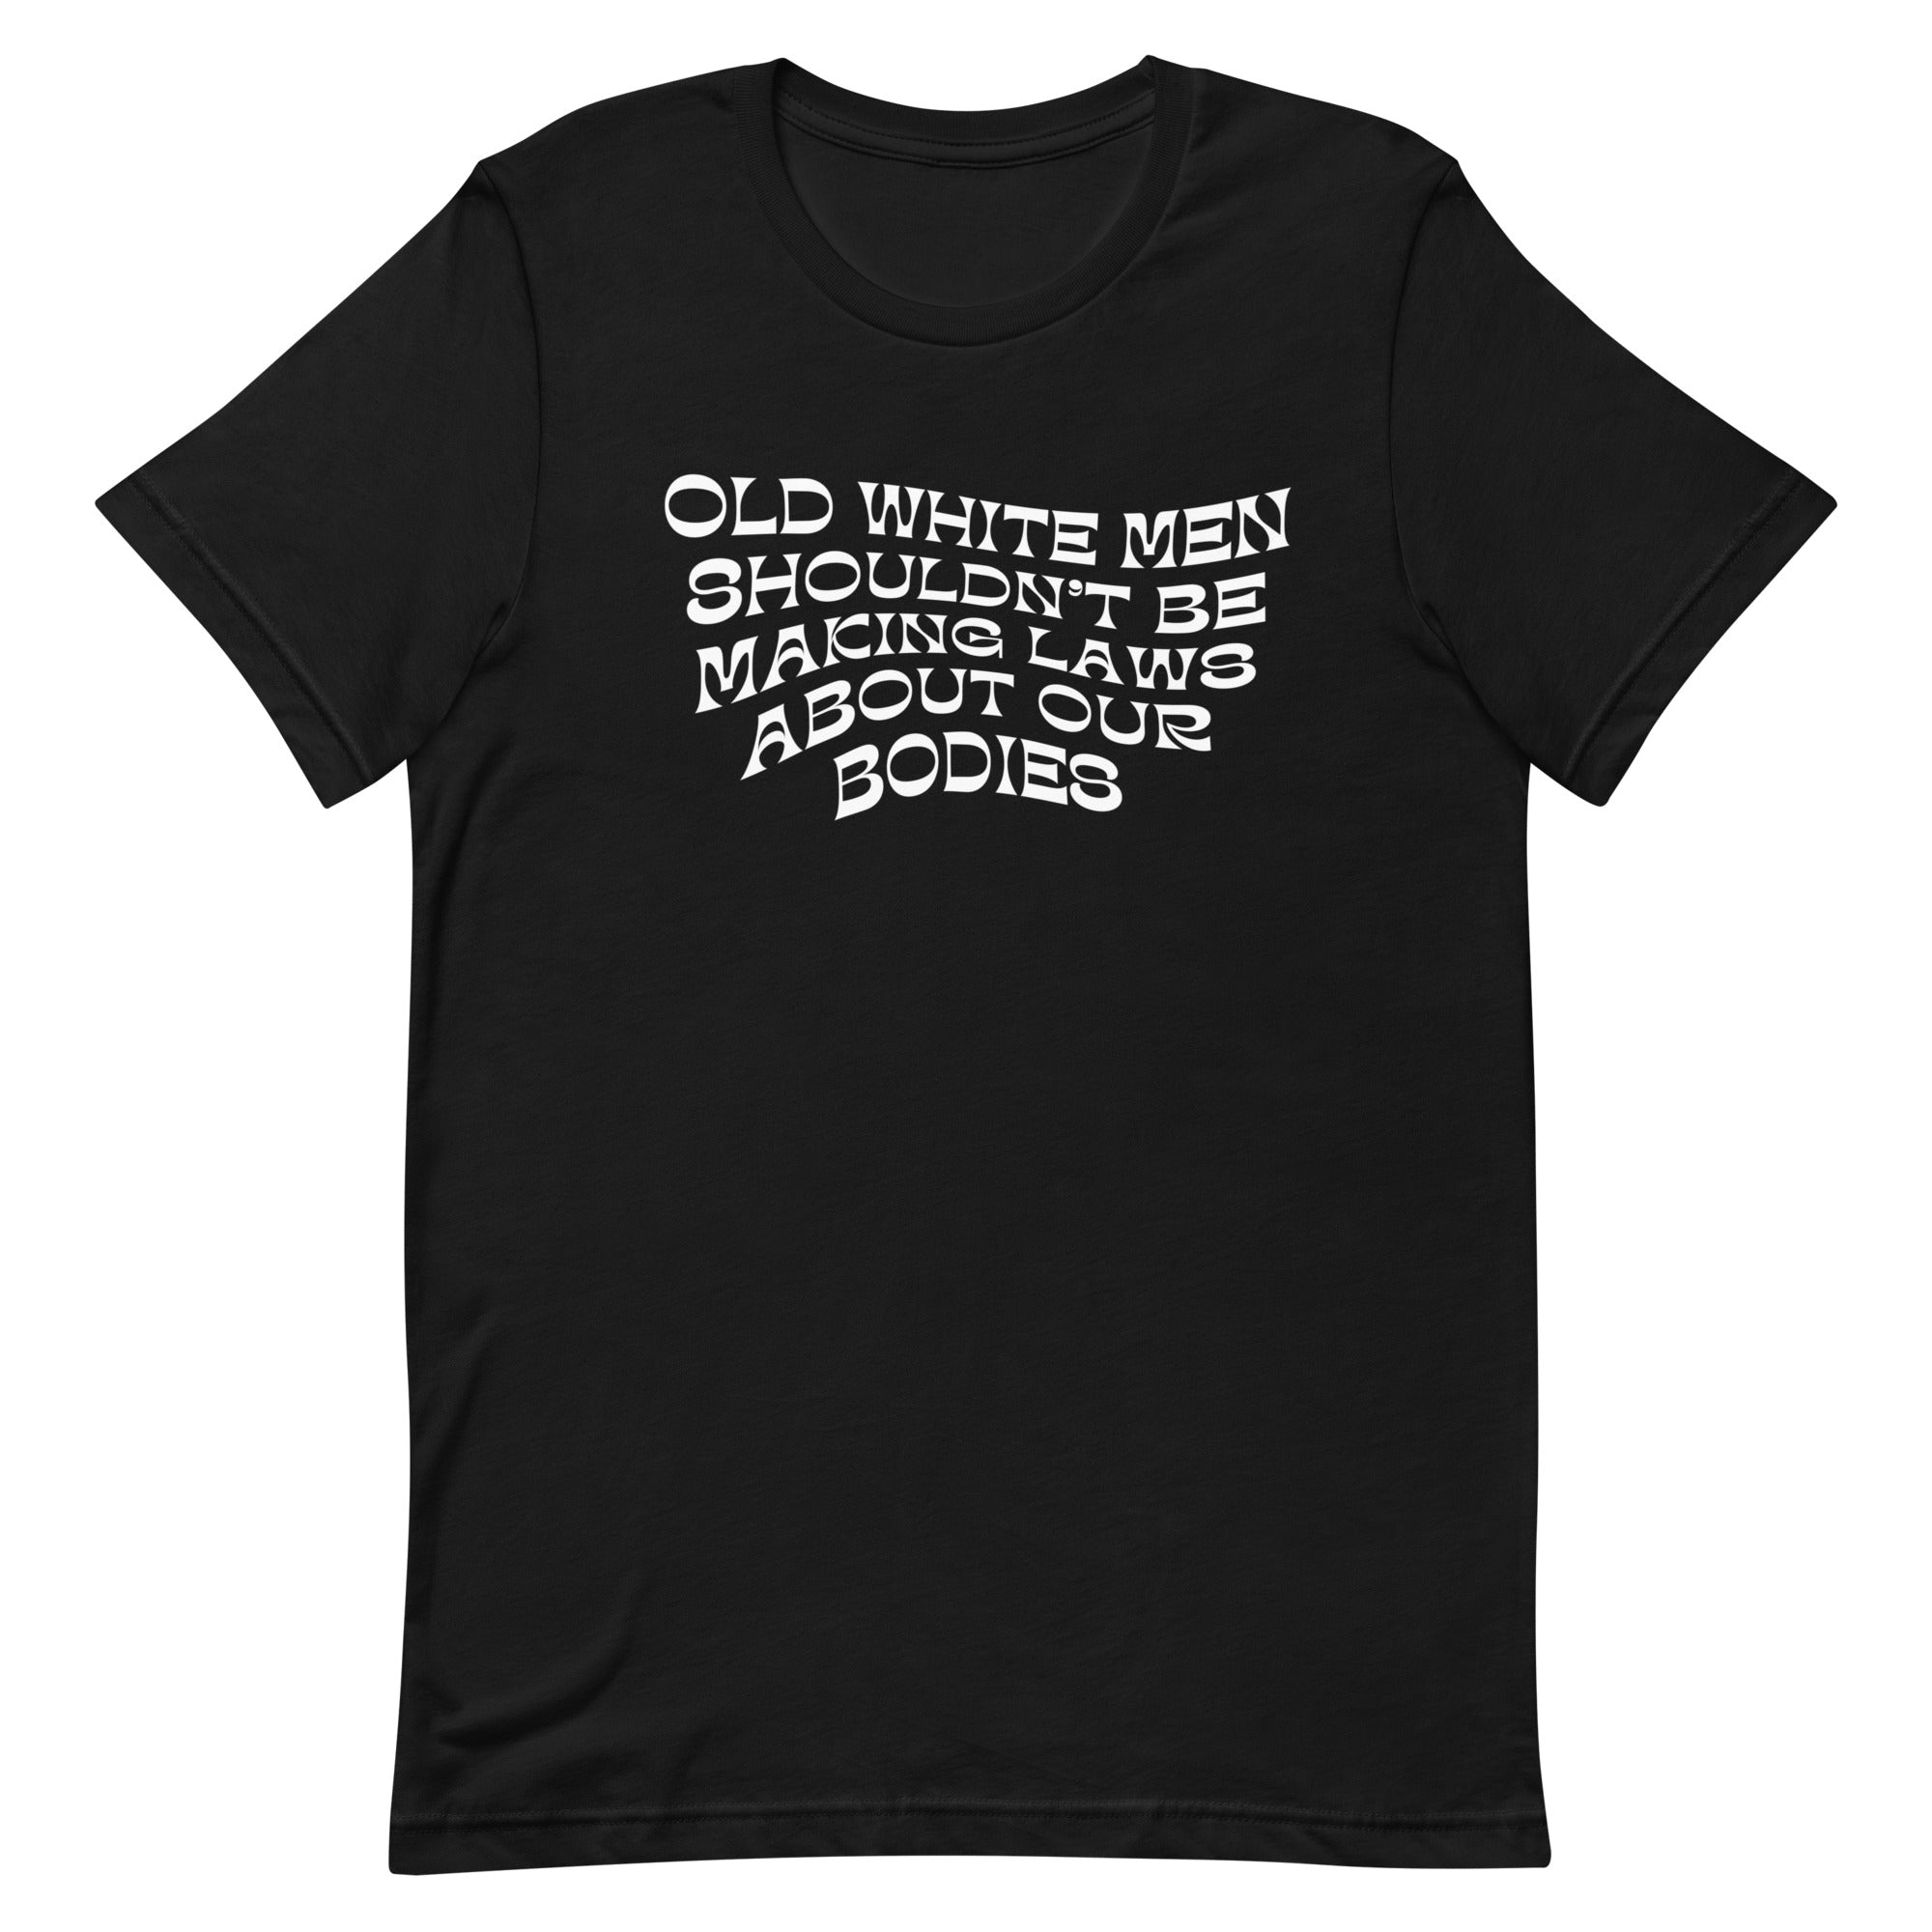 Old White Men Shouldn’t Be Making Laws About Our Bodies Unisex Feminist t-shirt - Shop Women’s Rights T-shirts - Feminist Trash Store - Black